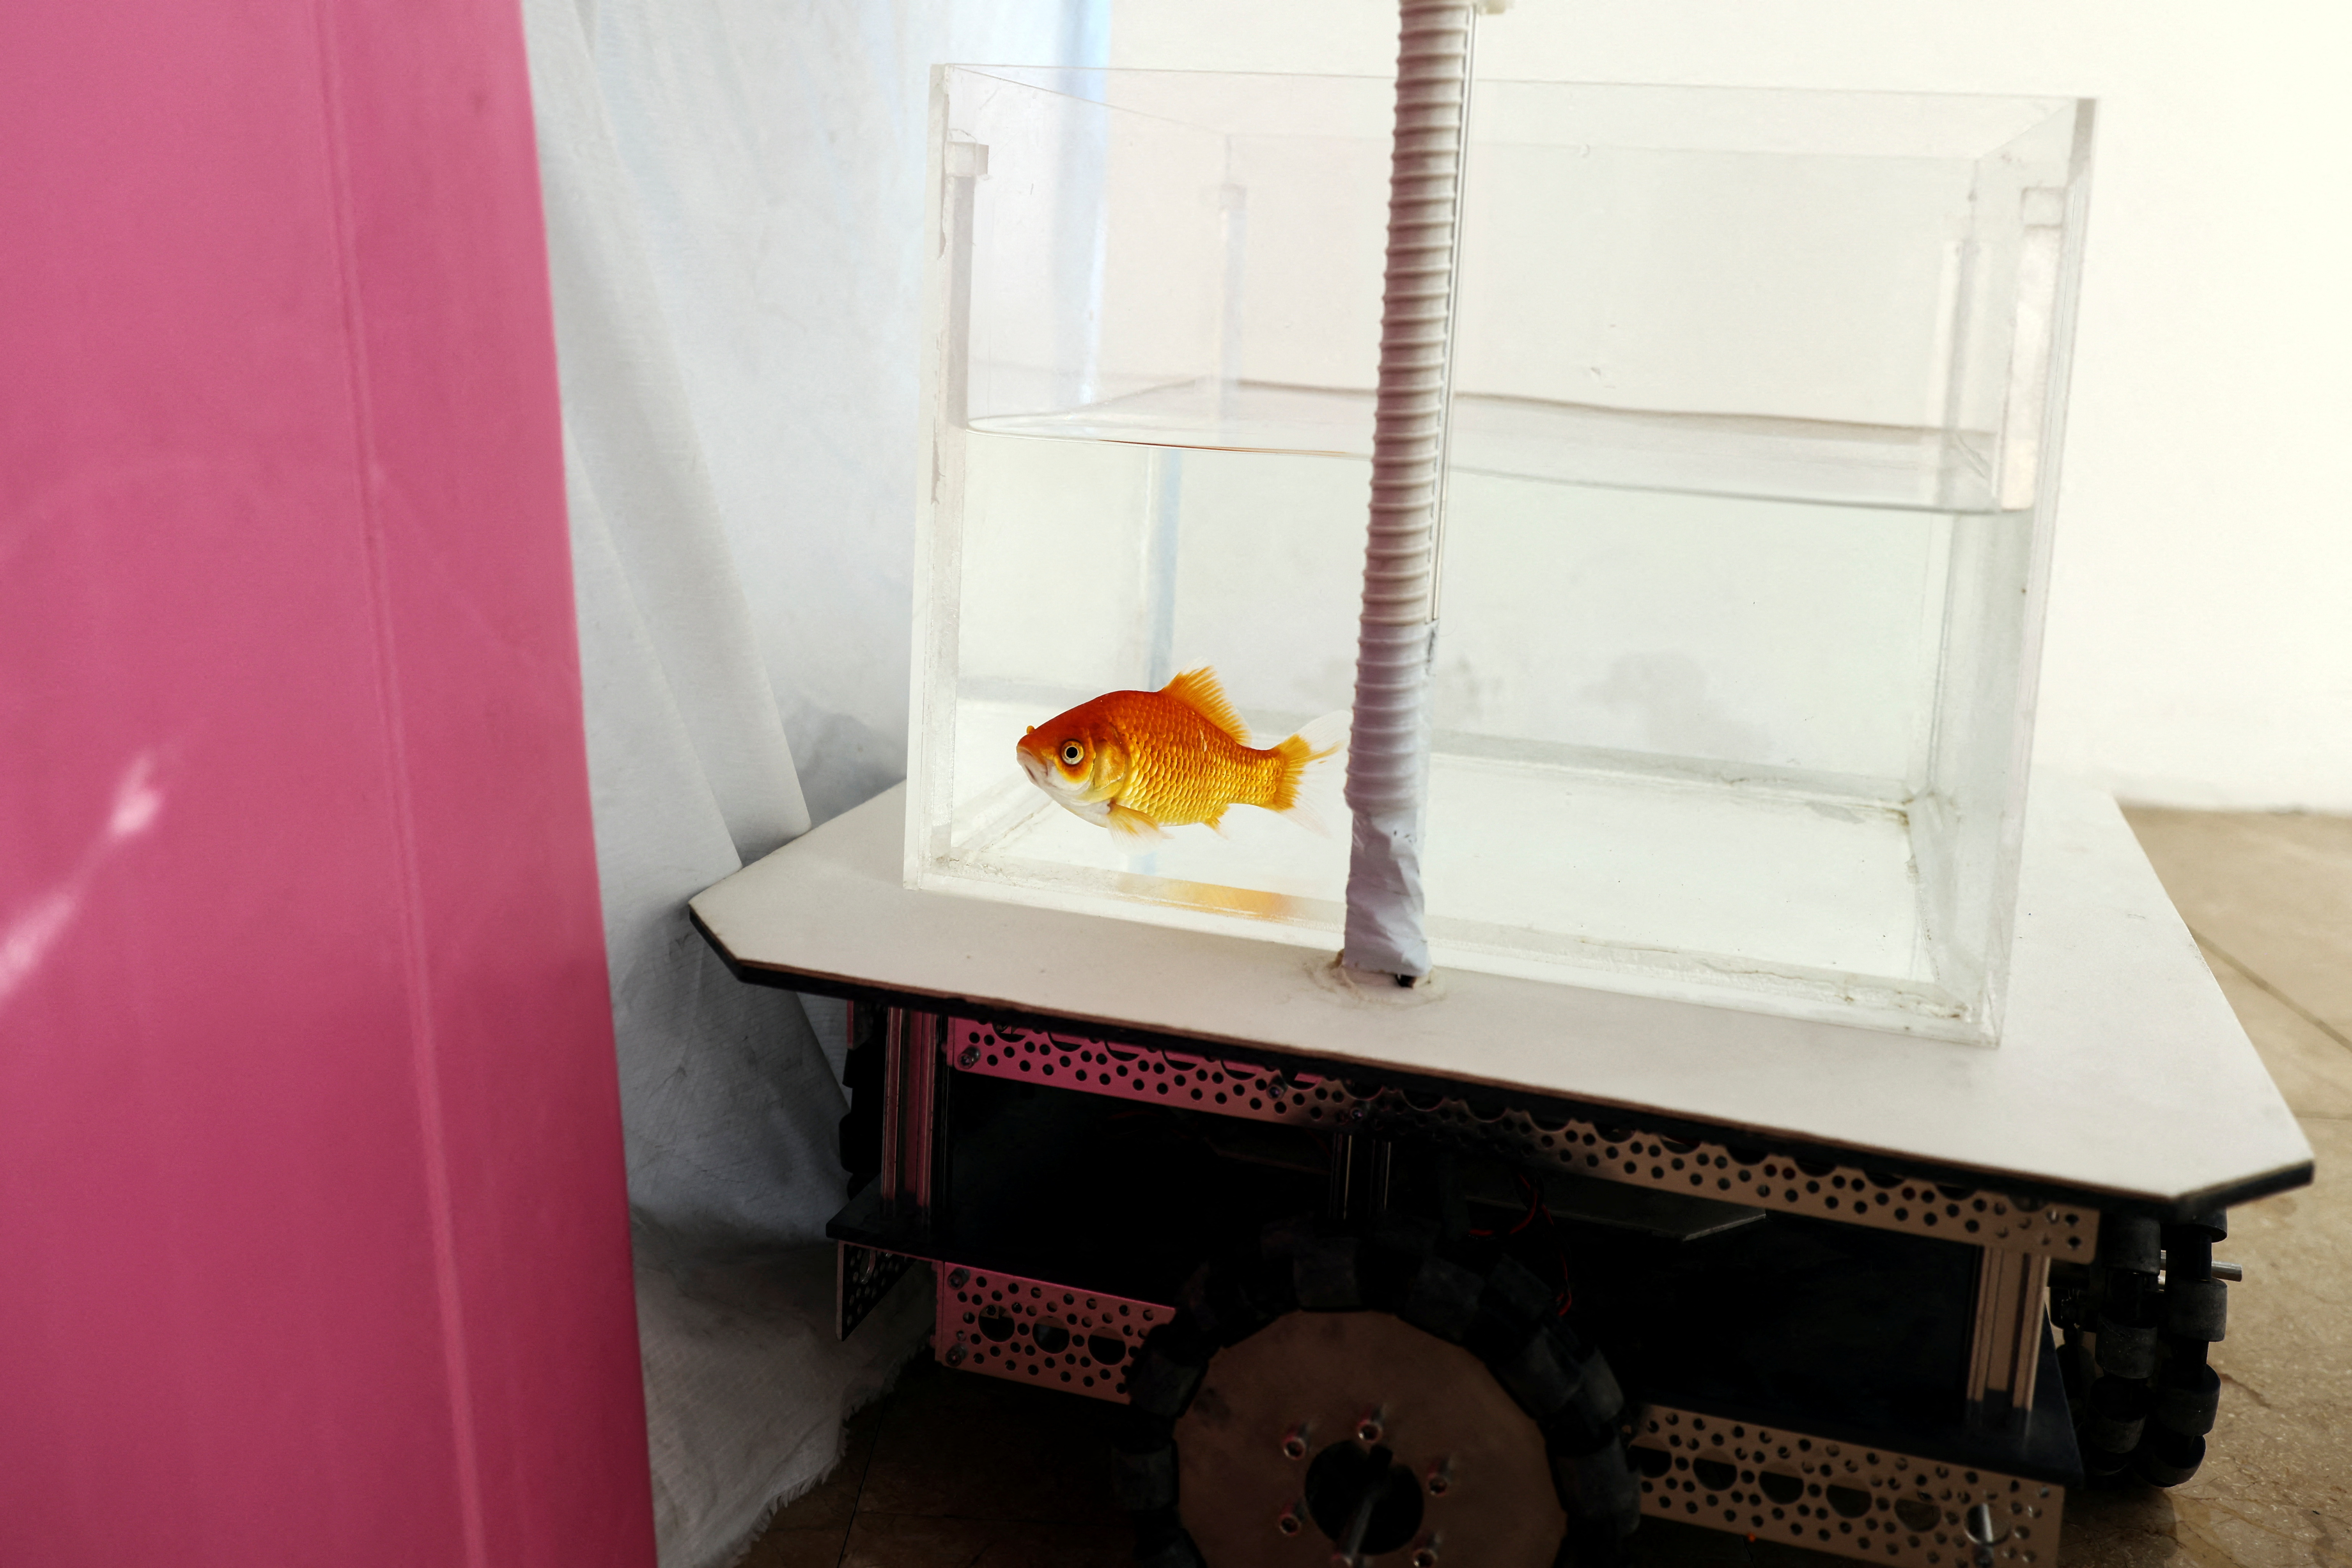 A goldfish navigates on land using a fish-operated vehicle developed by a research team at Ben-Gurion University in Beersheba, Israel, January 6, 2022. REUTERS/Ronen Zvulun